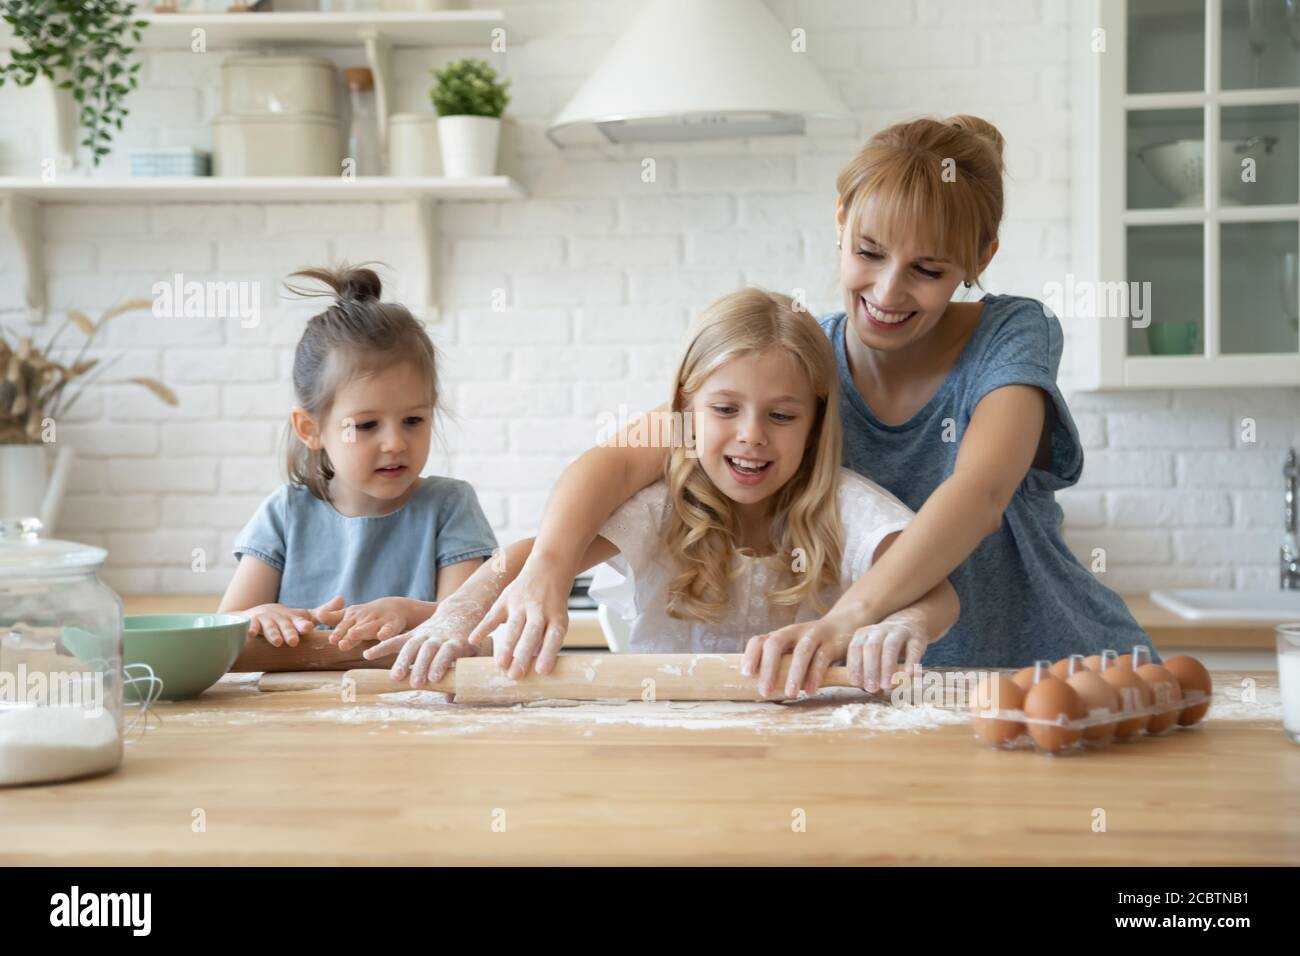 Millennial mother showing her little daughters how to roll dough Stock Photo